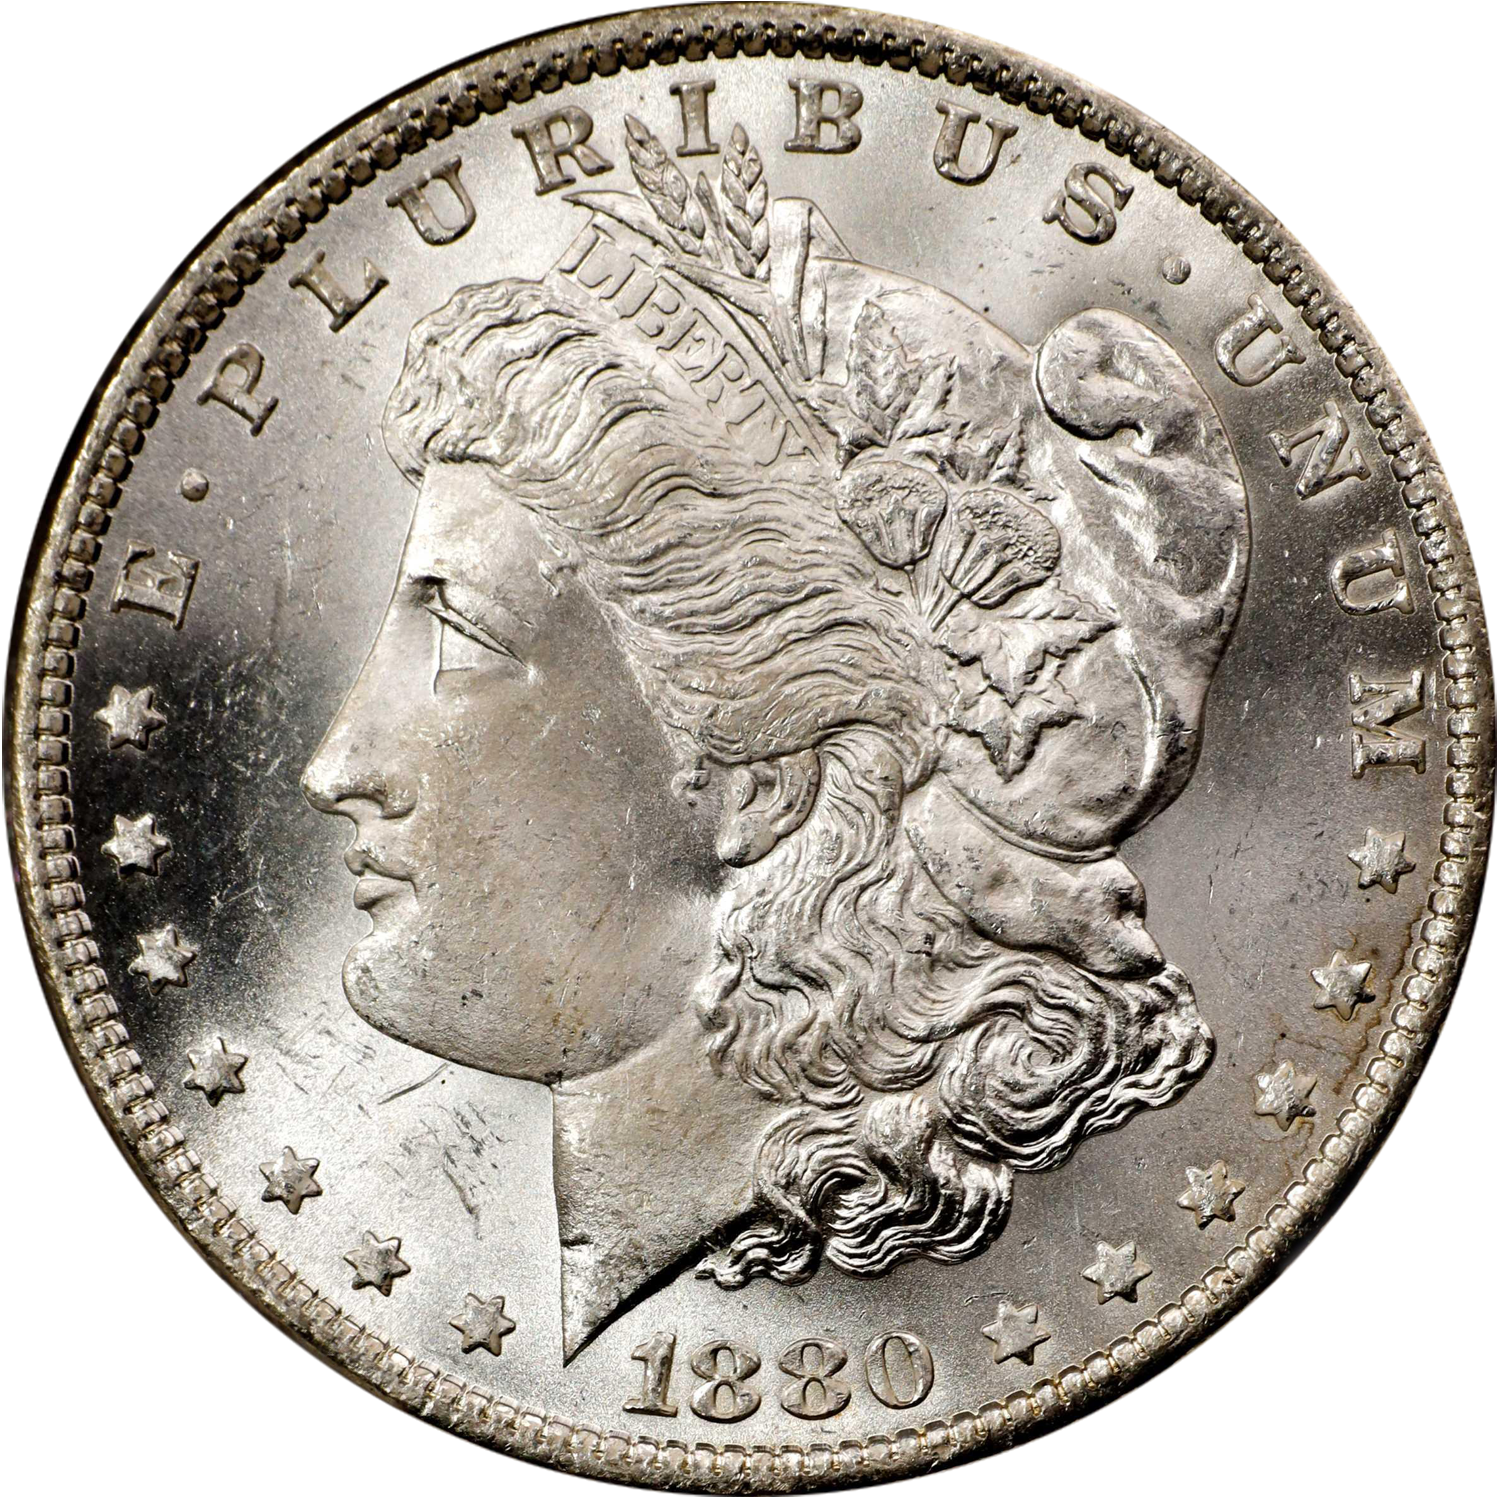 1880 new orleans morgan dollar price guide value